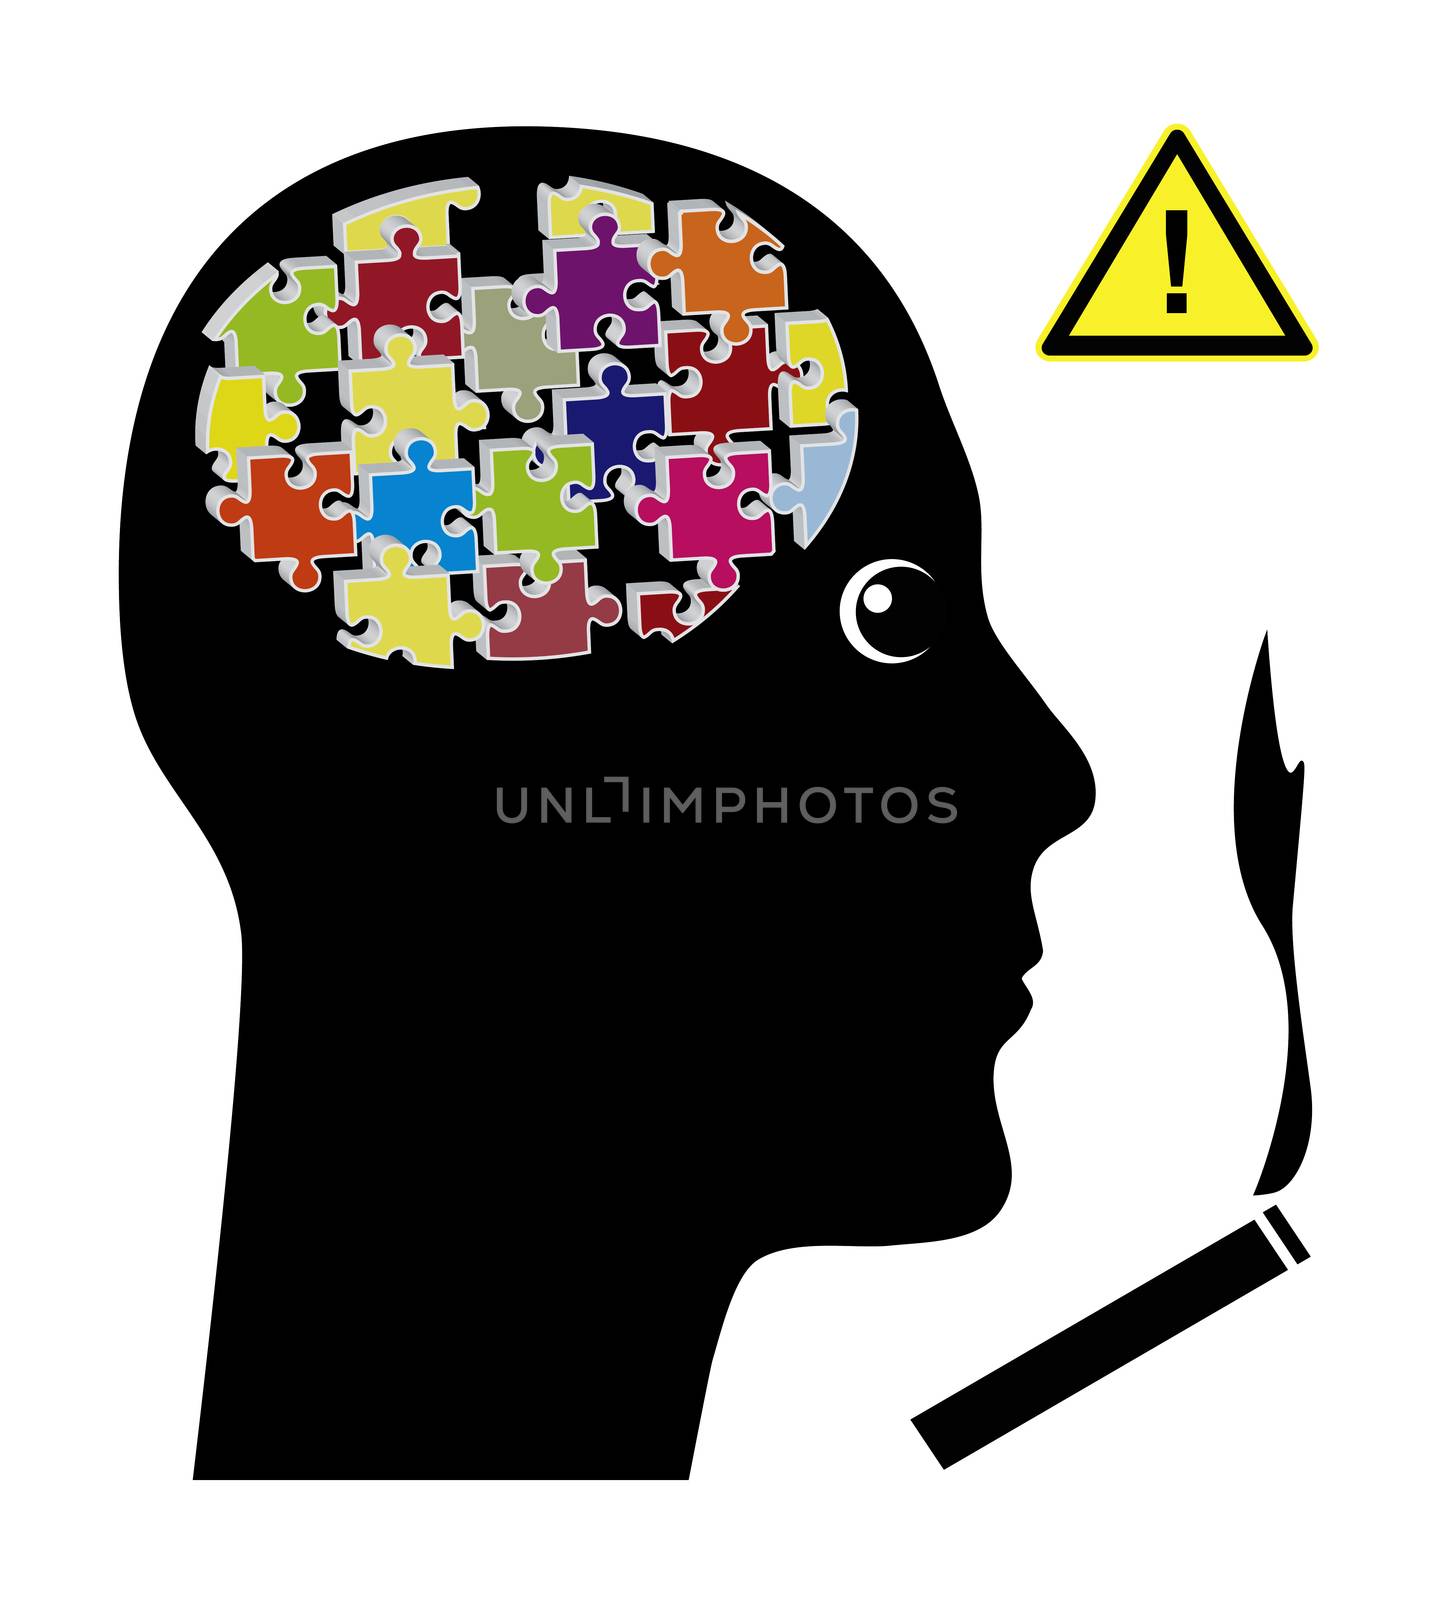 Cigarettes affect the Brain by Bambara